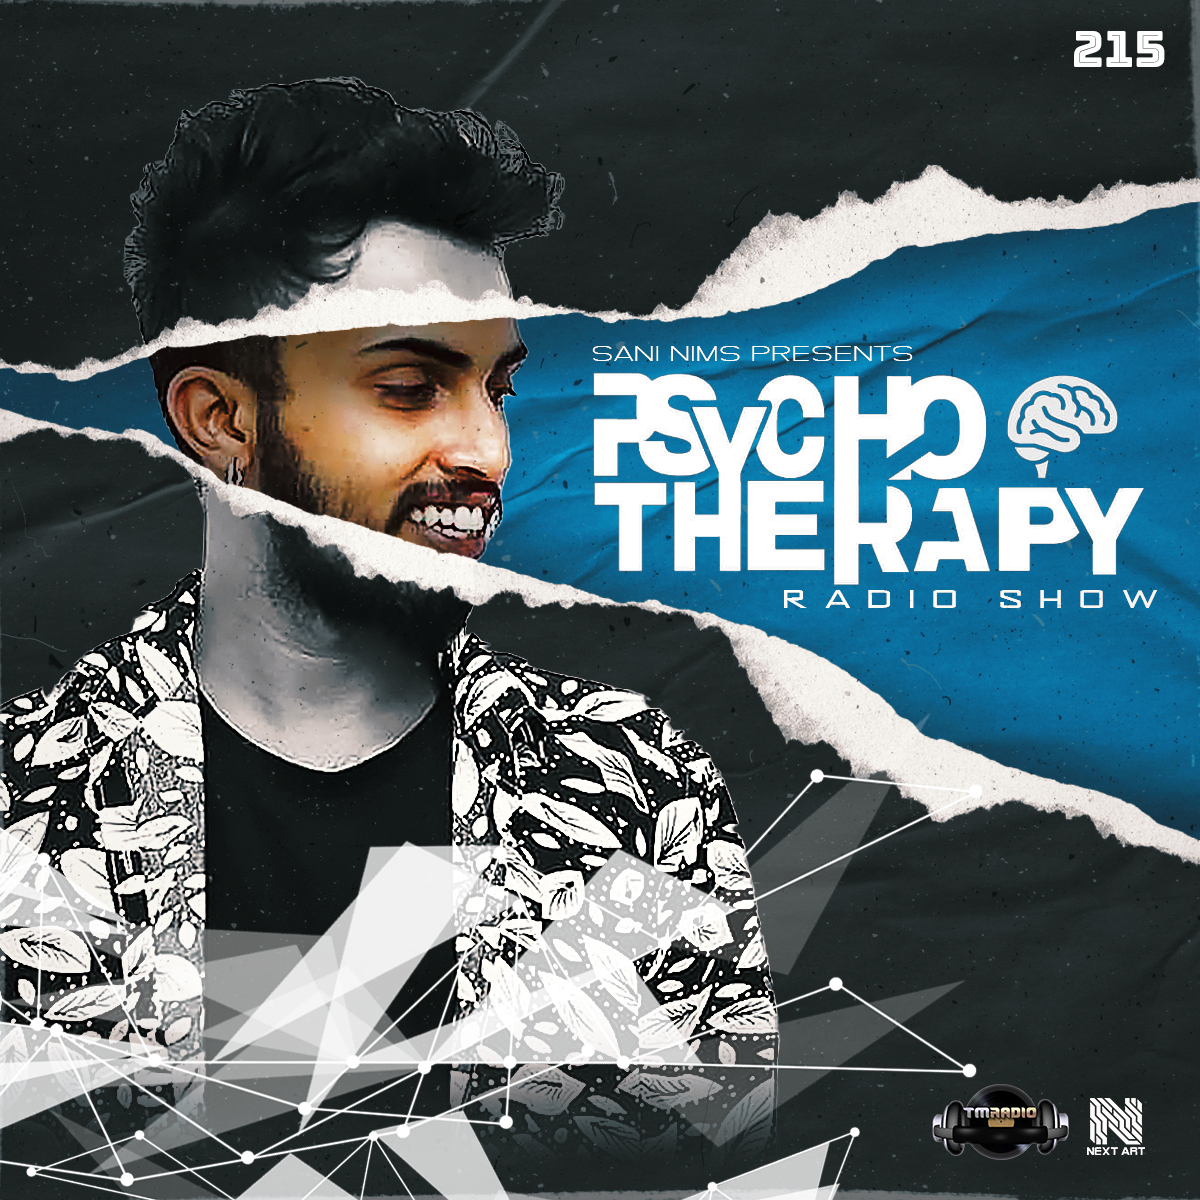 PSYCHO THERAPY EP 215 BY SANI NIMS ON TM RADIO (from November 16th, 2022)